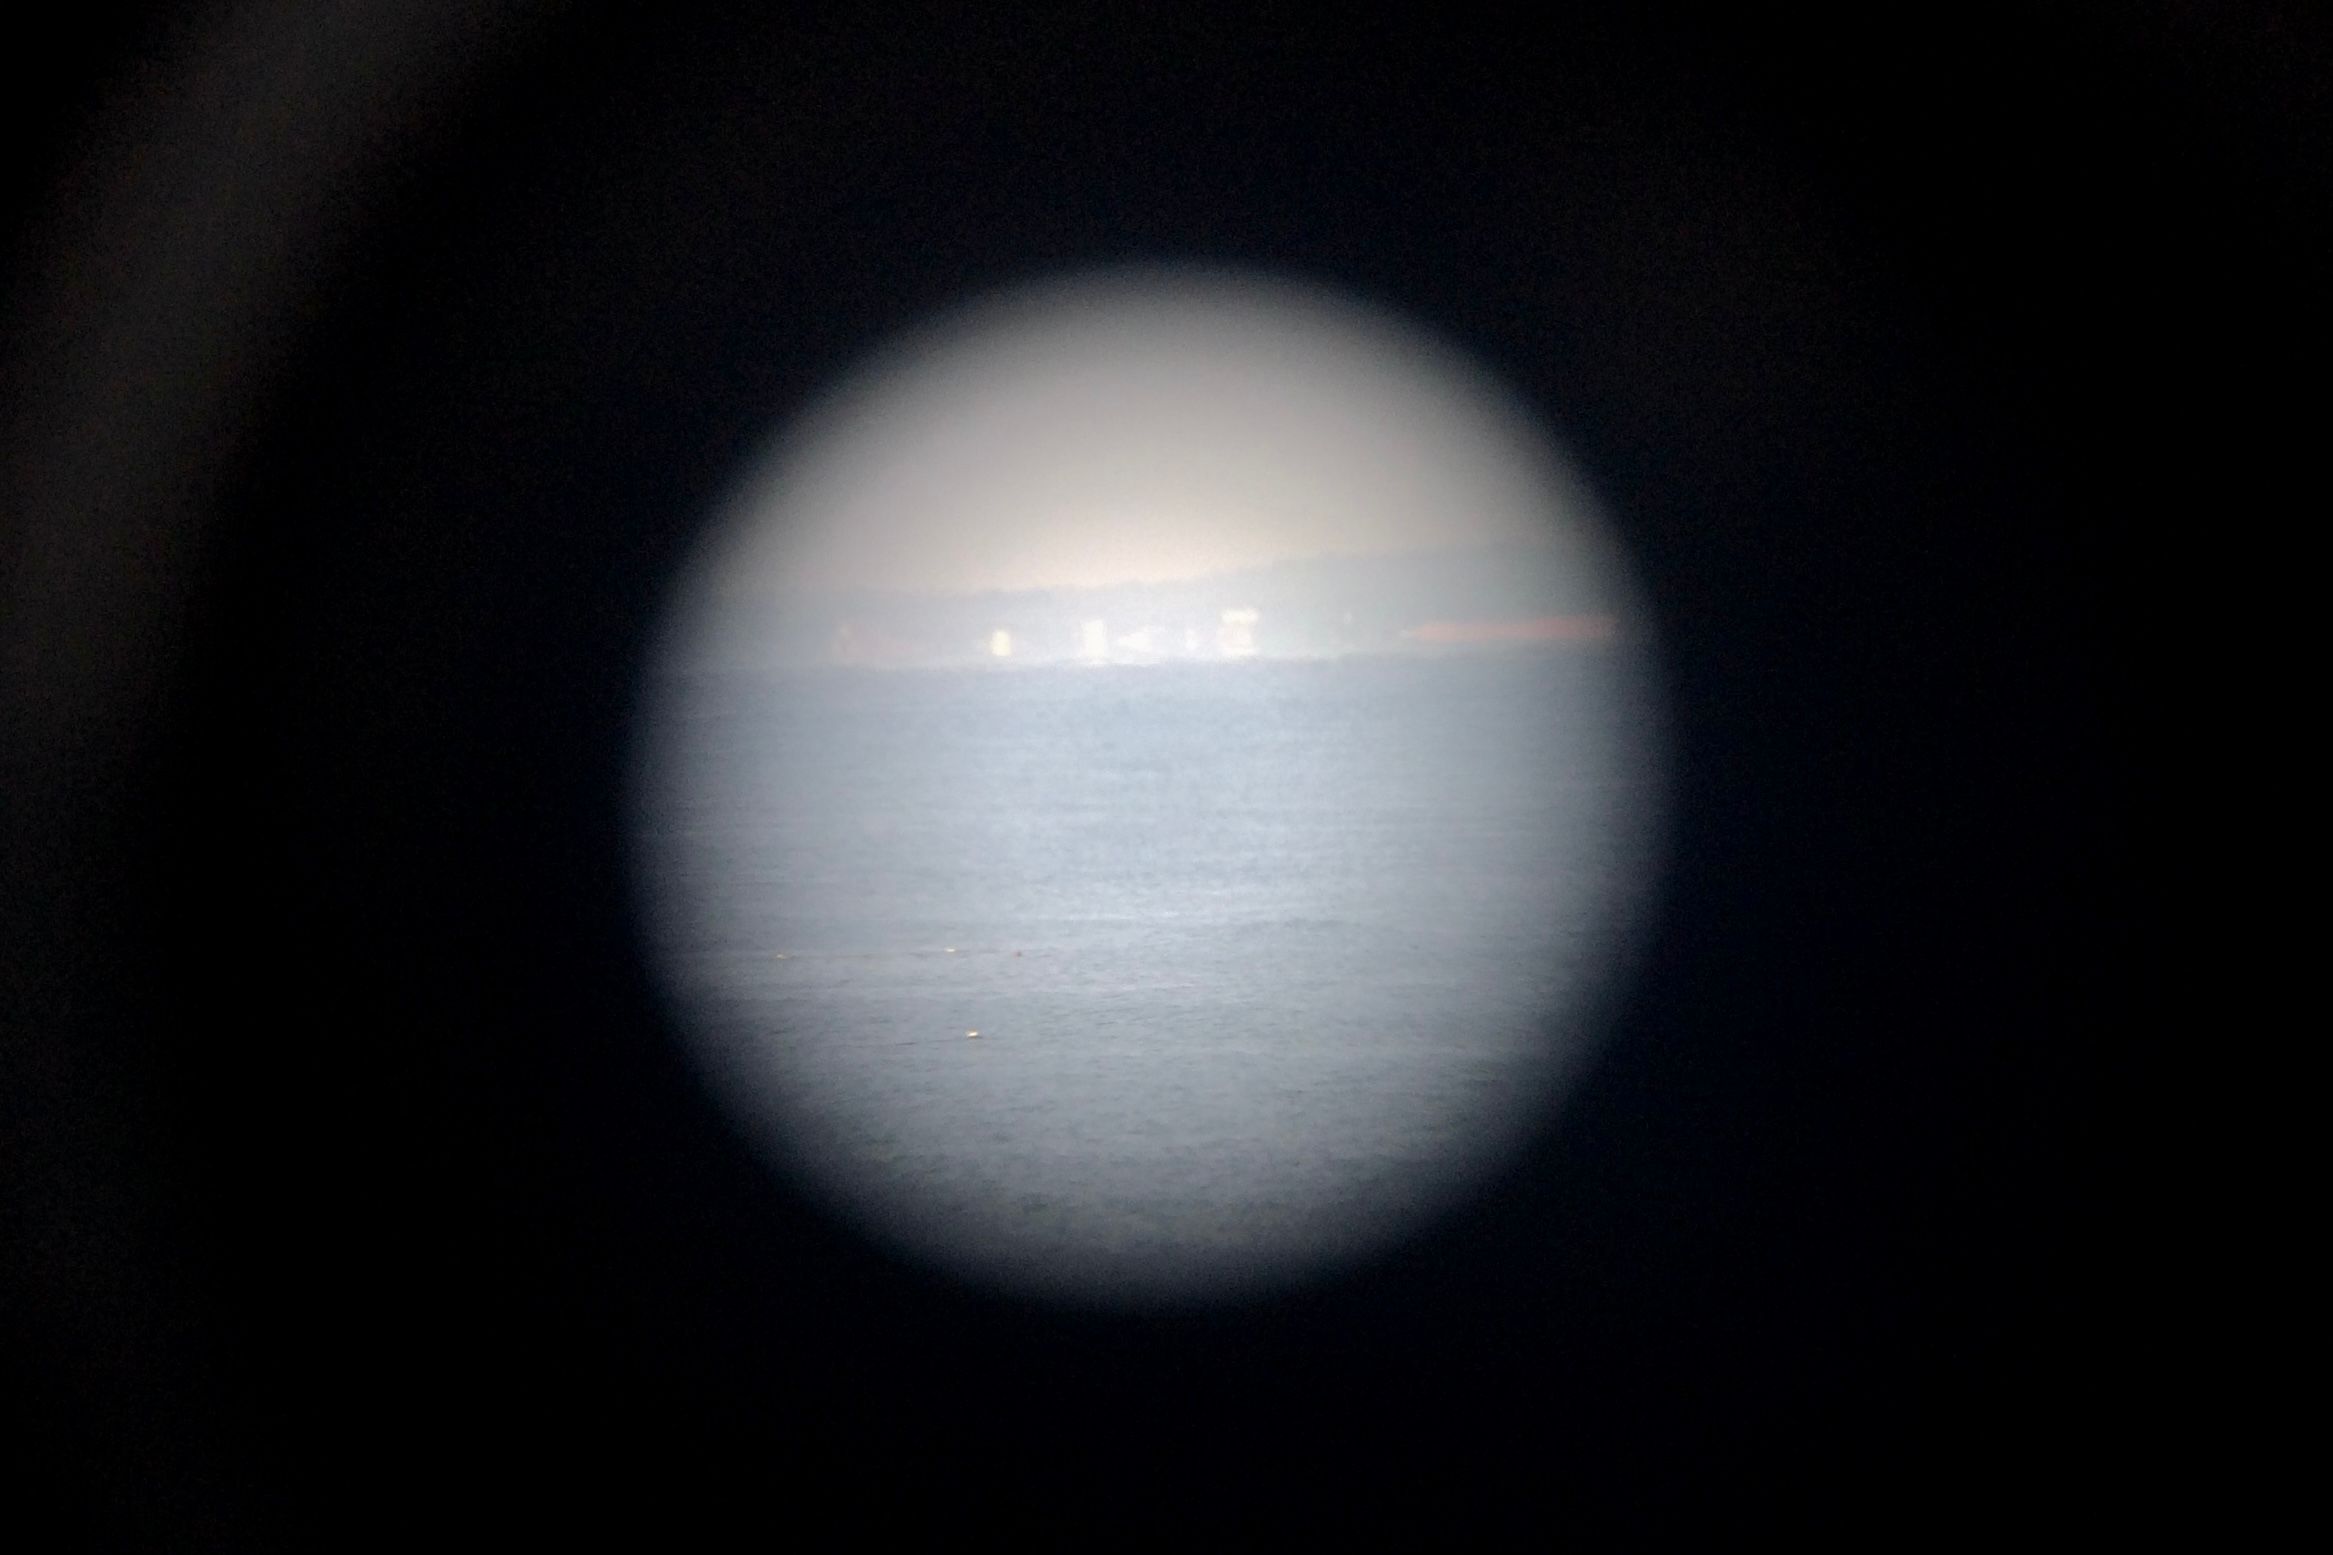 The outline of a town seen through a high-powered scope.